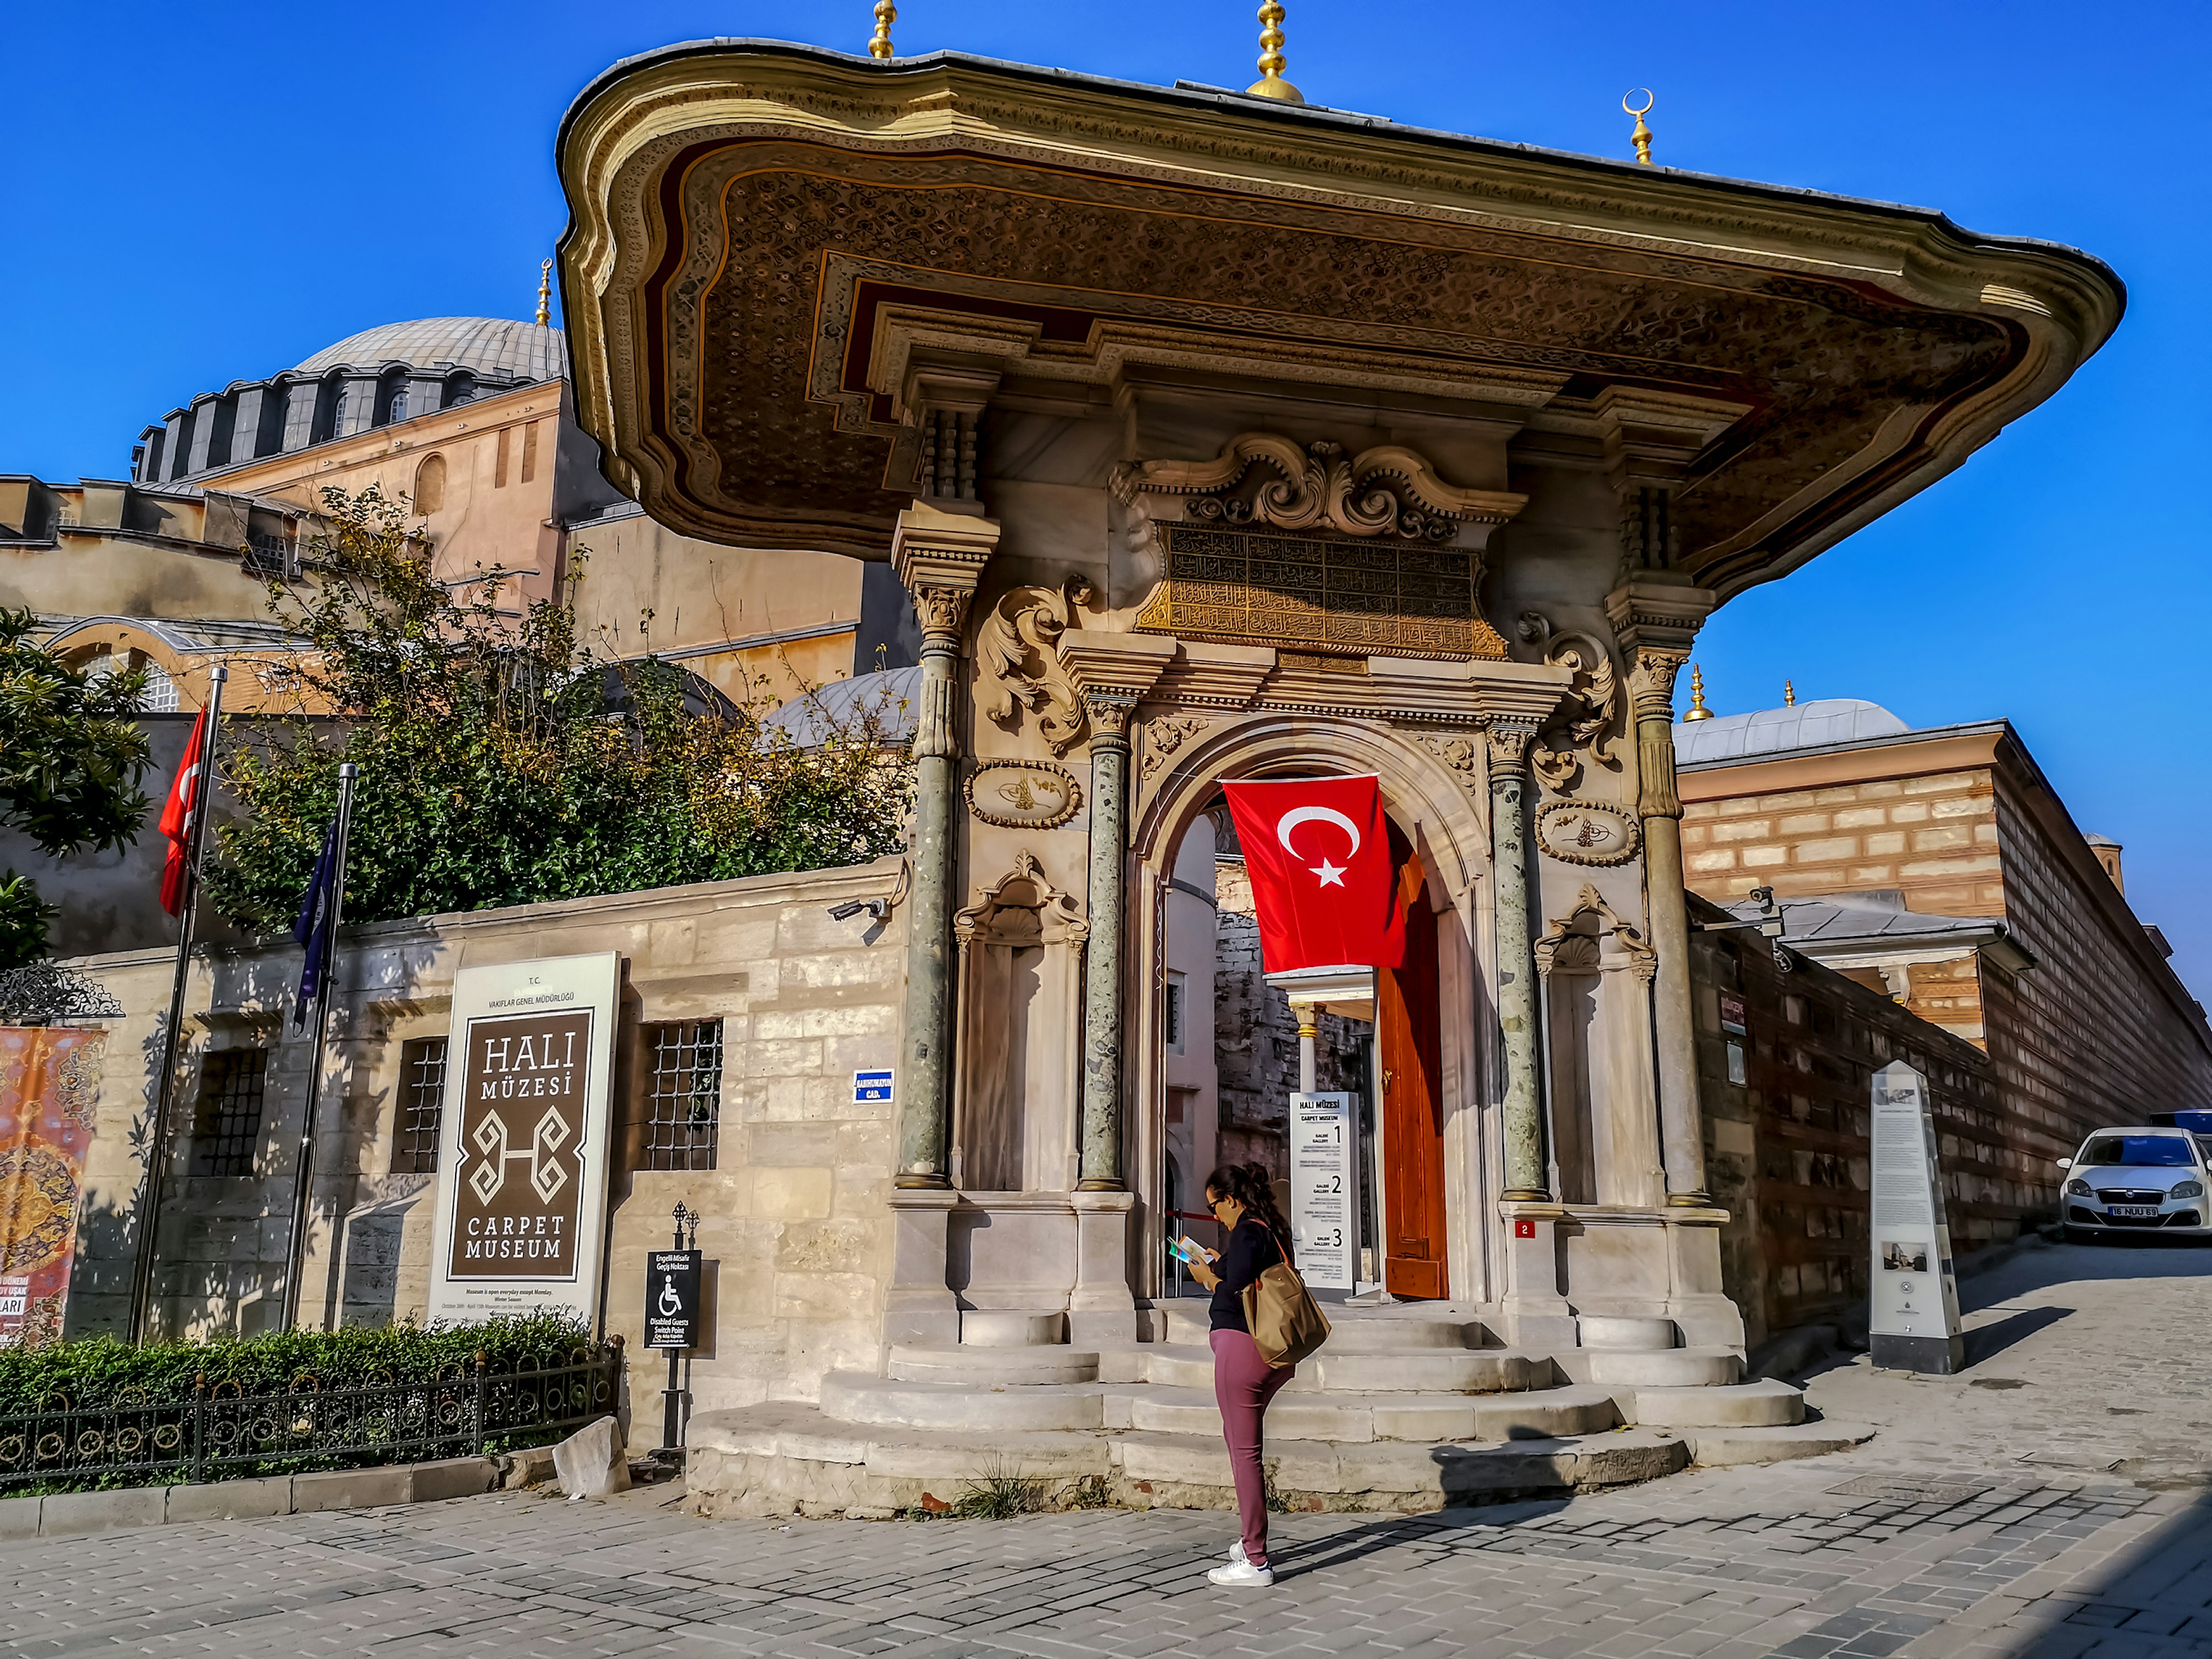 Istanbul, Turkey - October 29, 2019: An adult woman tourist with a guidebook in her hands at the entrance to the Carpet Museum in Istanbul. Turkish landmark in the old town